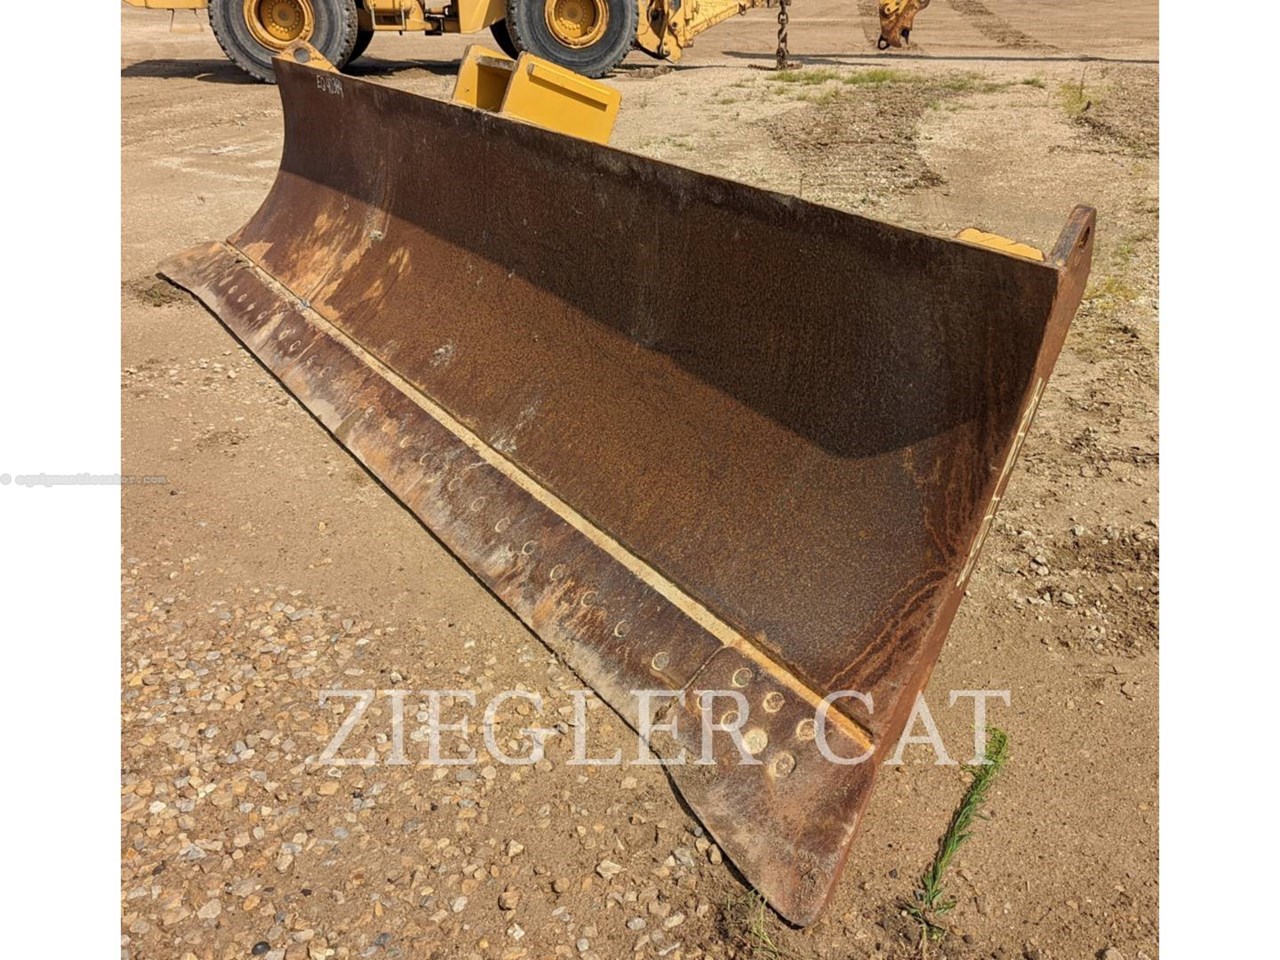 2018 Caterpillar D8T TRACK TYPE TRACTOR ANGLE BLADE Image 1